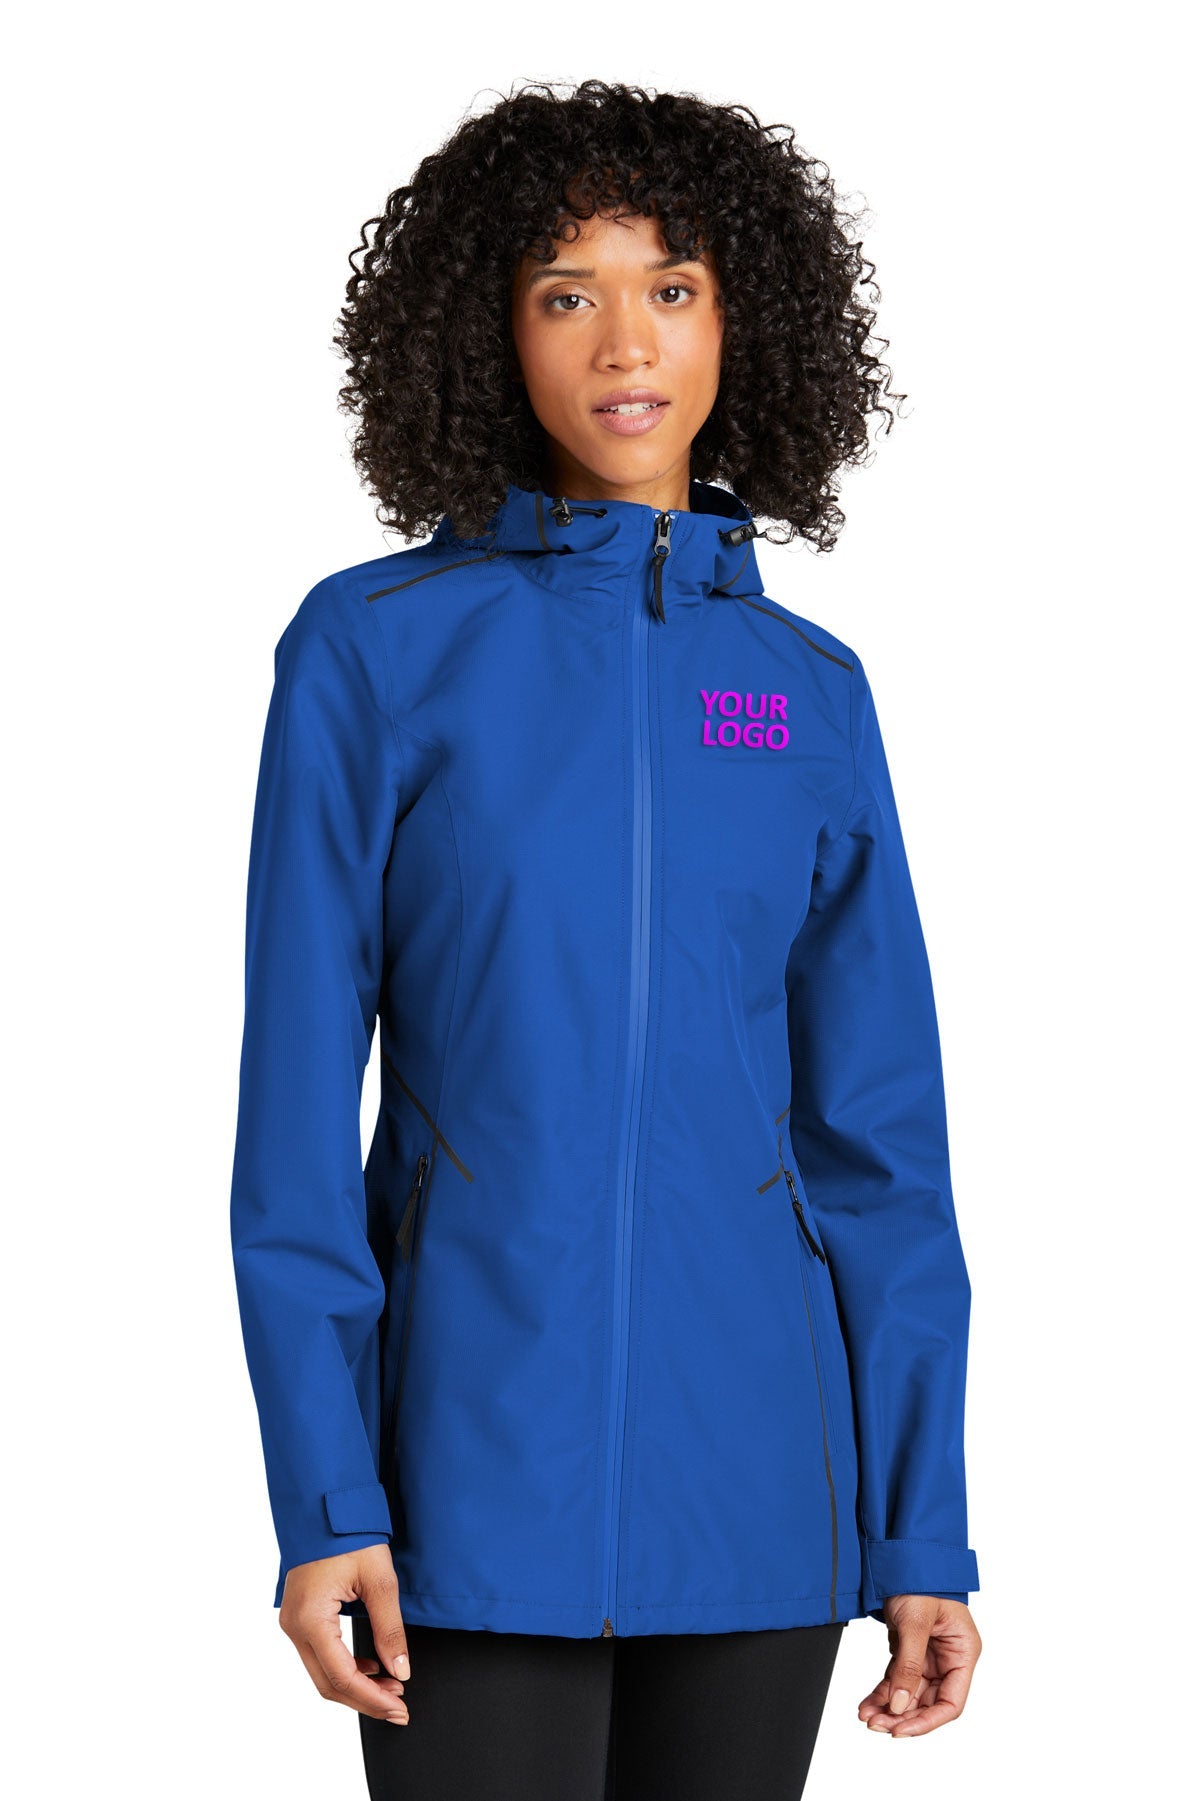 Port Authority True Royal L920 embroidered team jackets